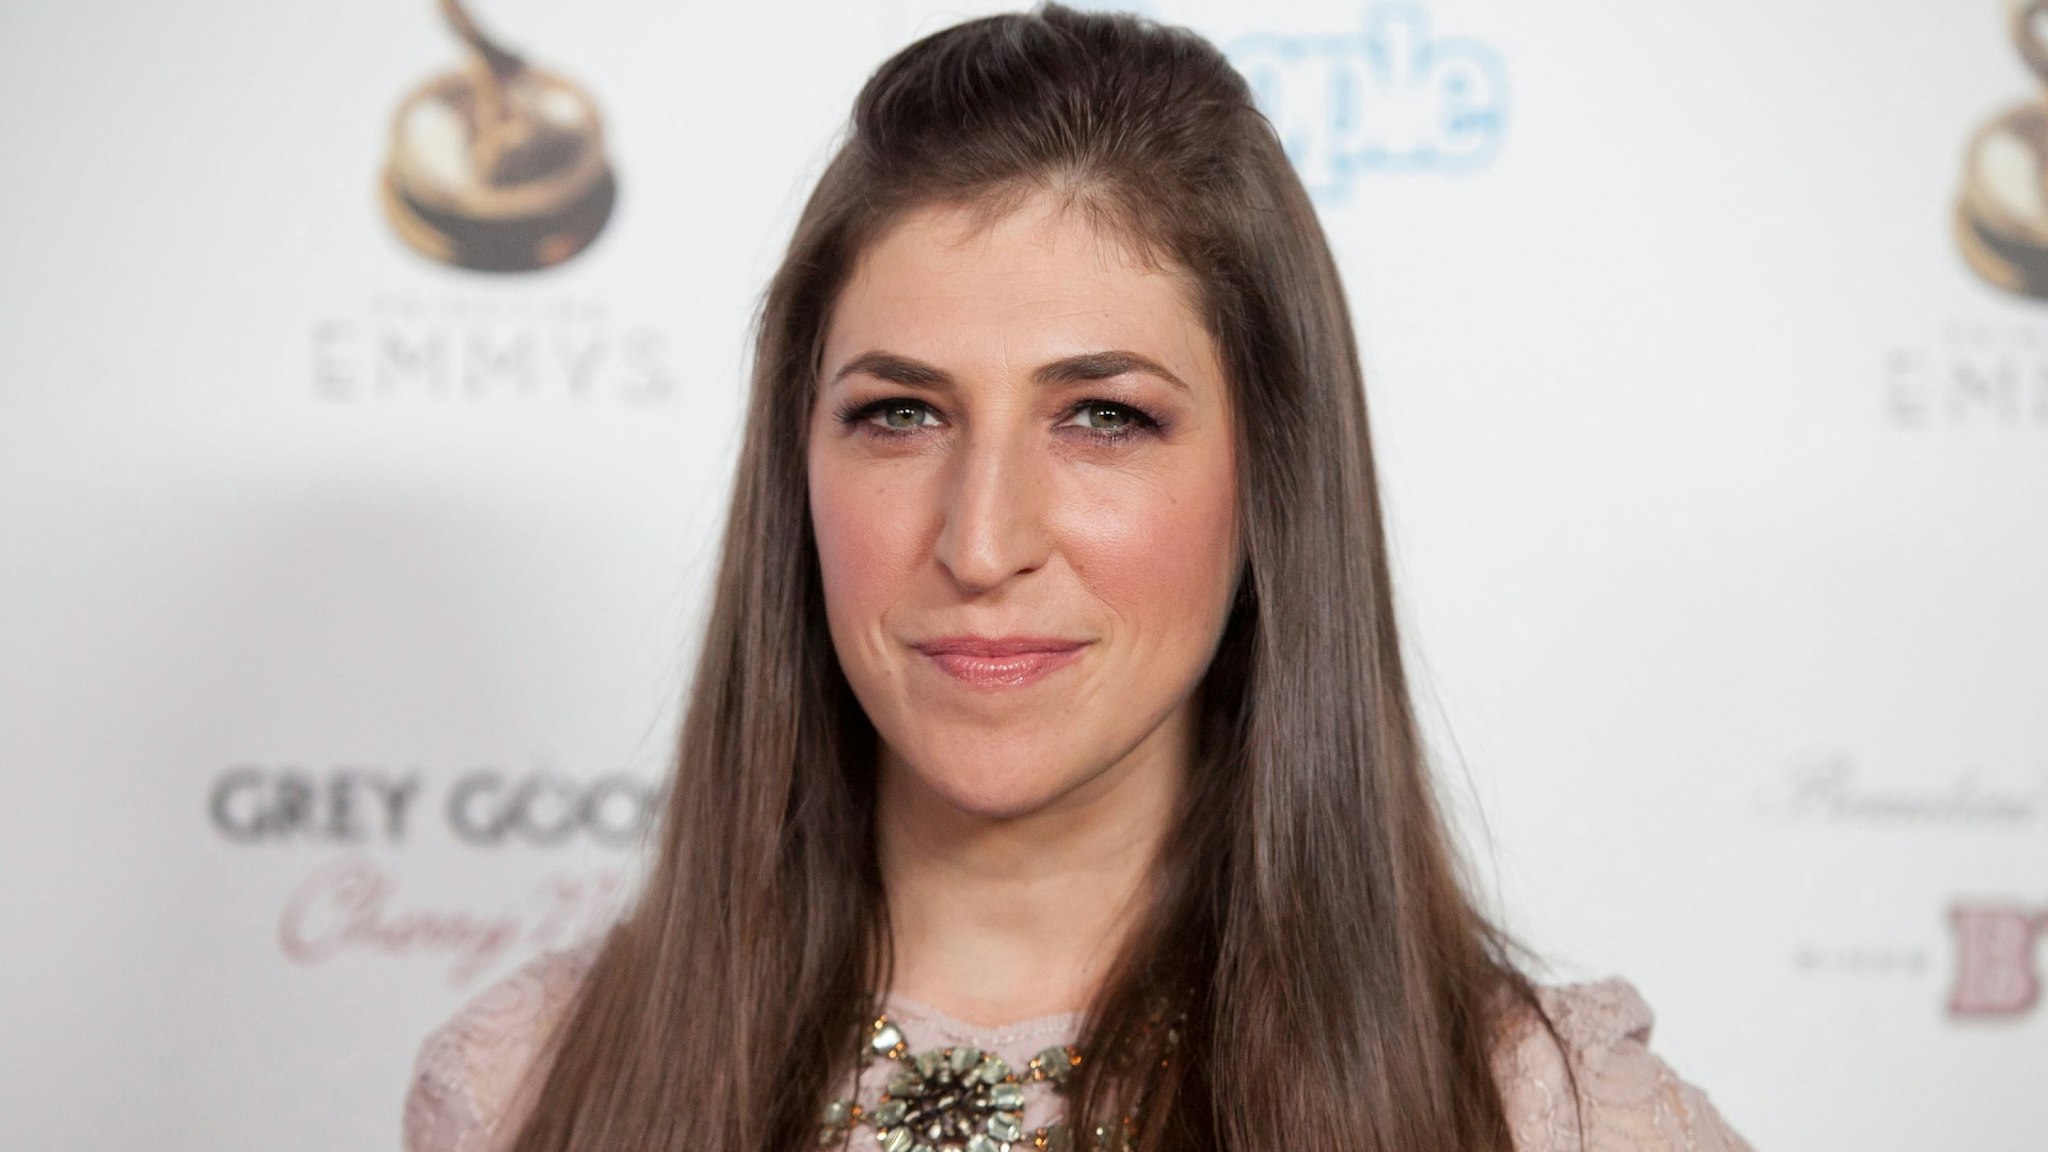 Actress Mayim Bialik attends The Academy Of Television Arts & Sciences Performer Nominees' 64th Primetime Emmy Awards Reception at Spectra by Wolfgang Puck at the Pacific Design Center on September 21, 2012 in West Hollywood, California.